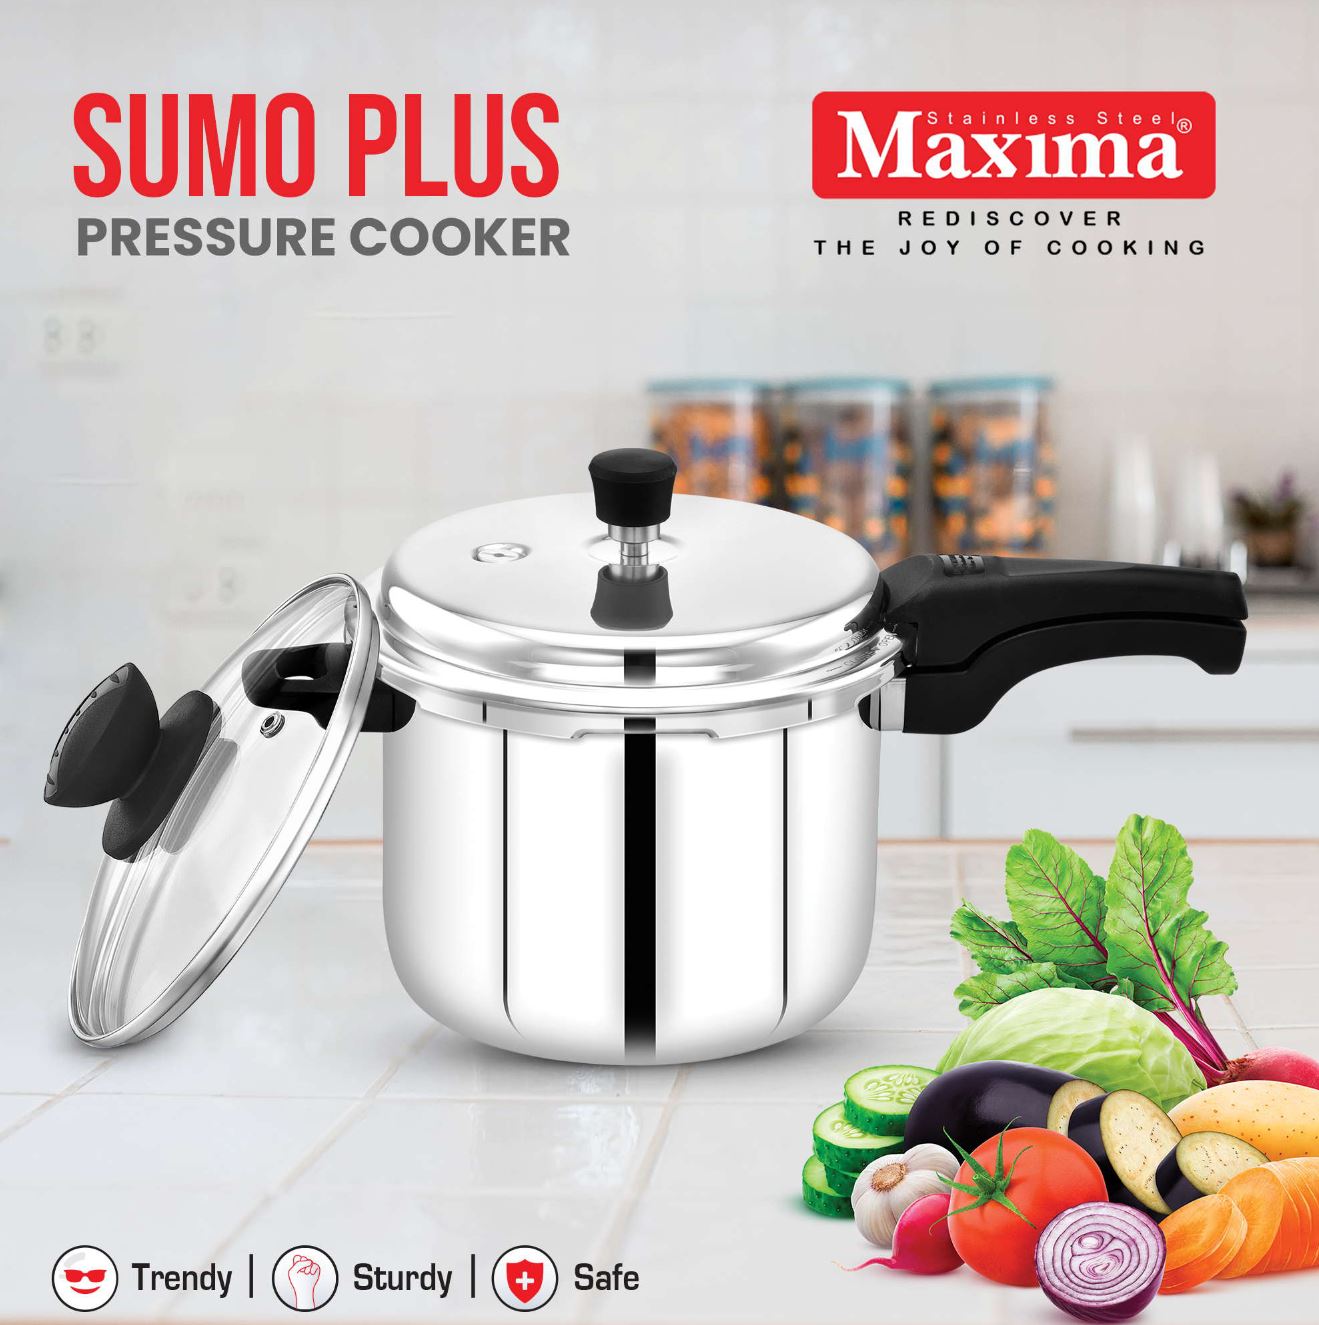  Maxima's Finest Collection of Innovative Cookware